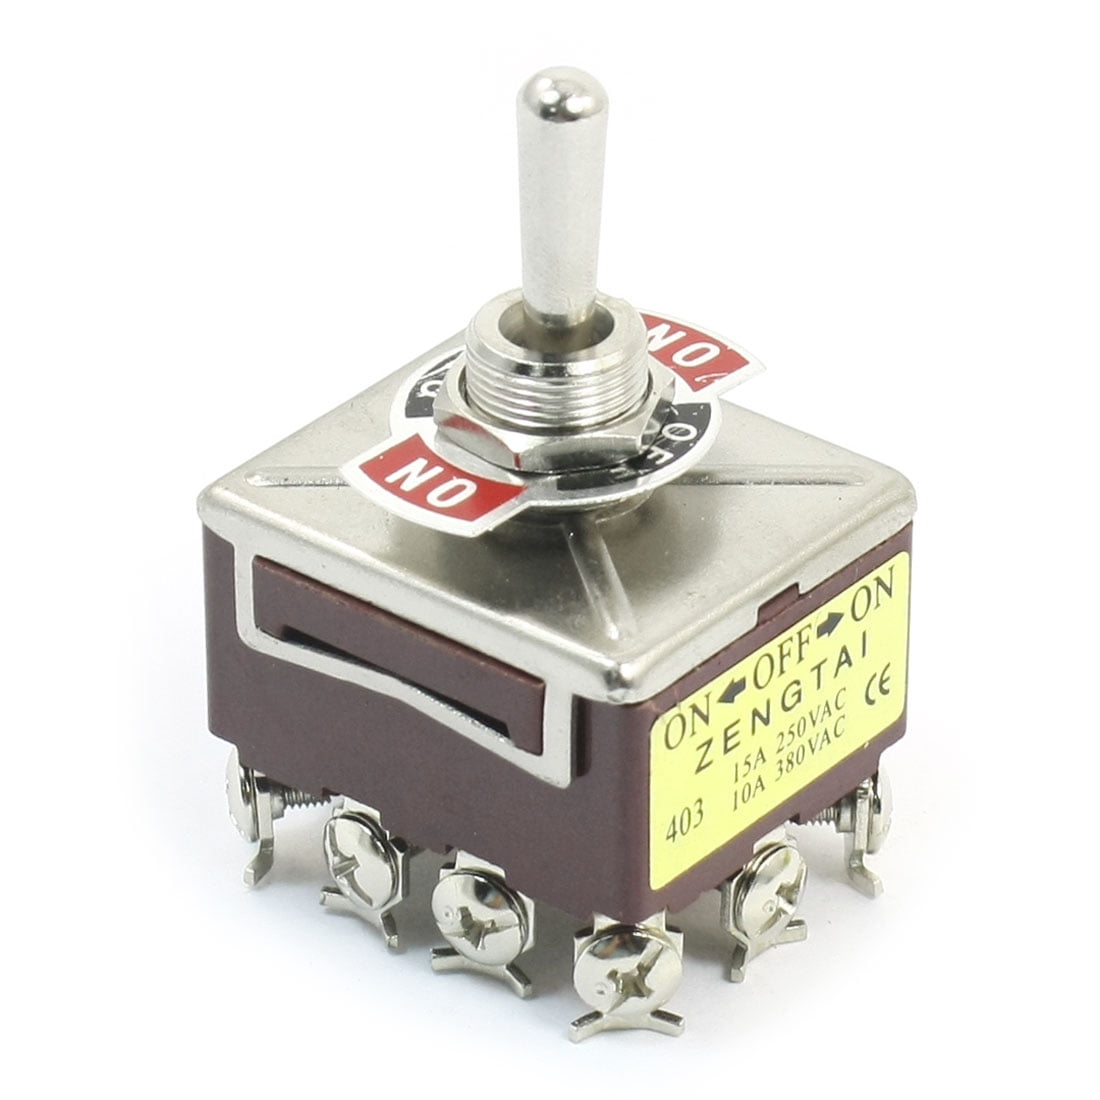 Yohii Toggle Switch AC 250V/10A 125V/15A DPDT 3 Position ON/Off/ON 6 Pins 